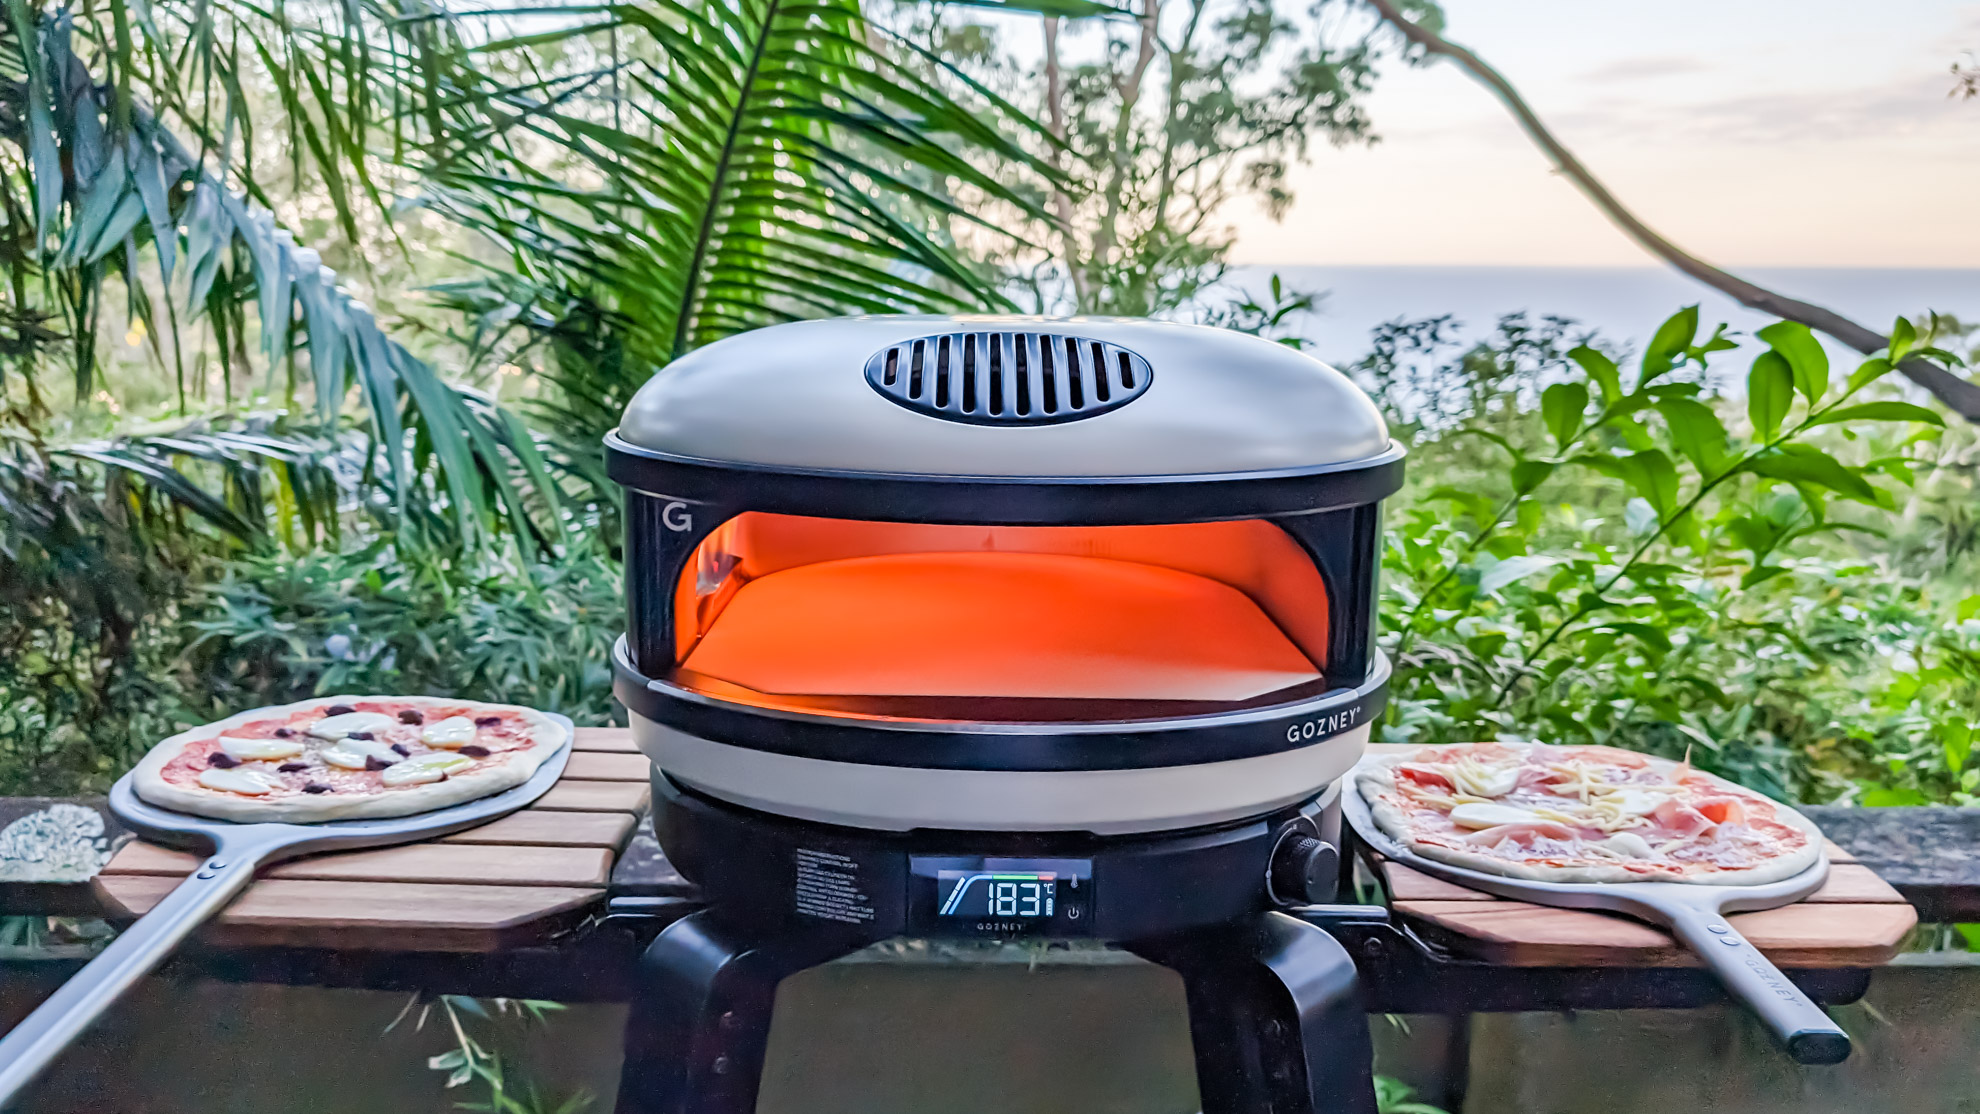 Gozney Arc XL review: this pizza oven is a crowd pleaser